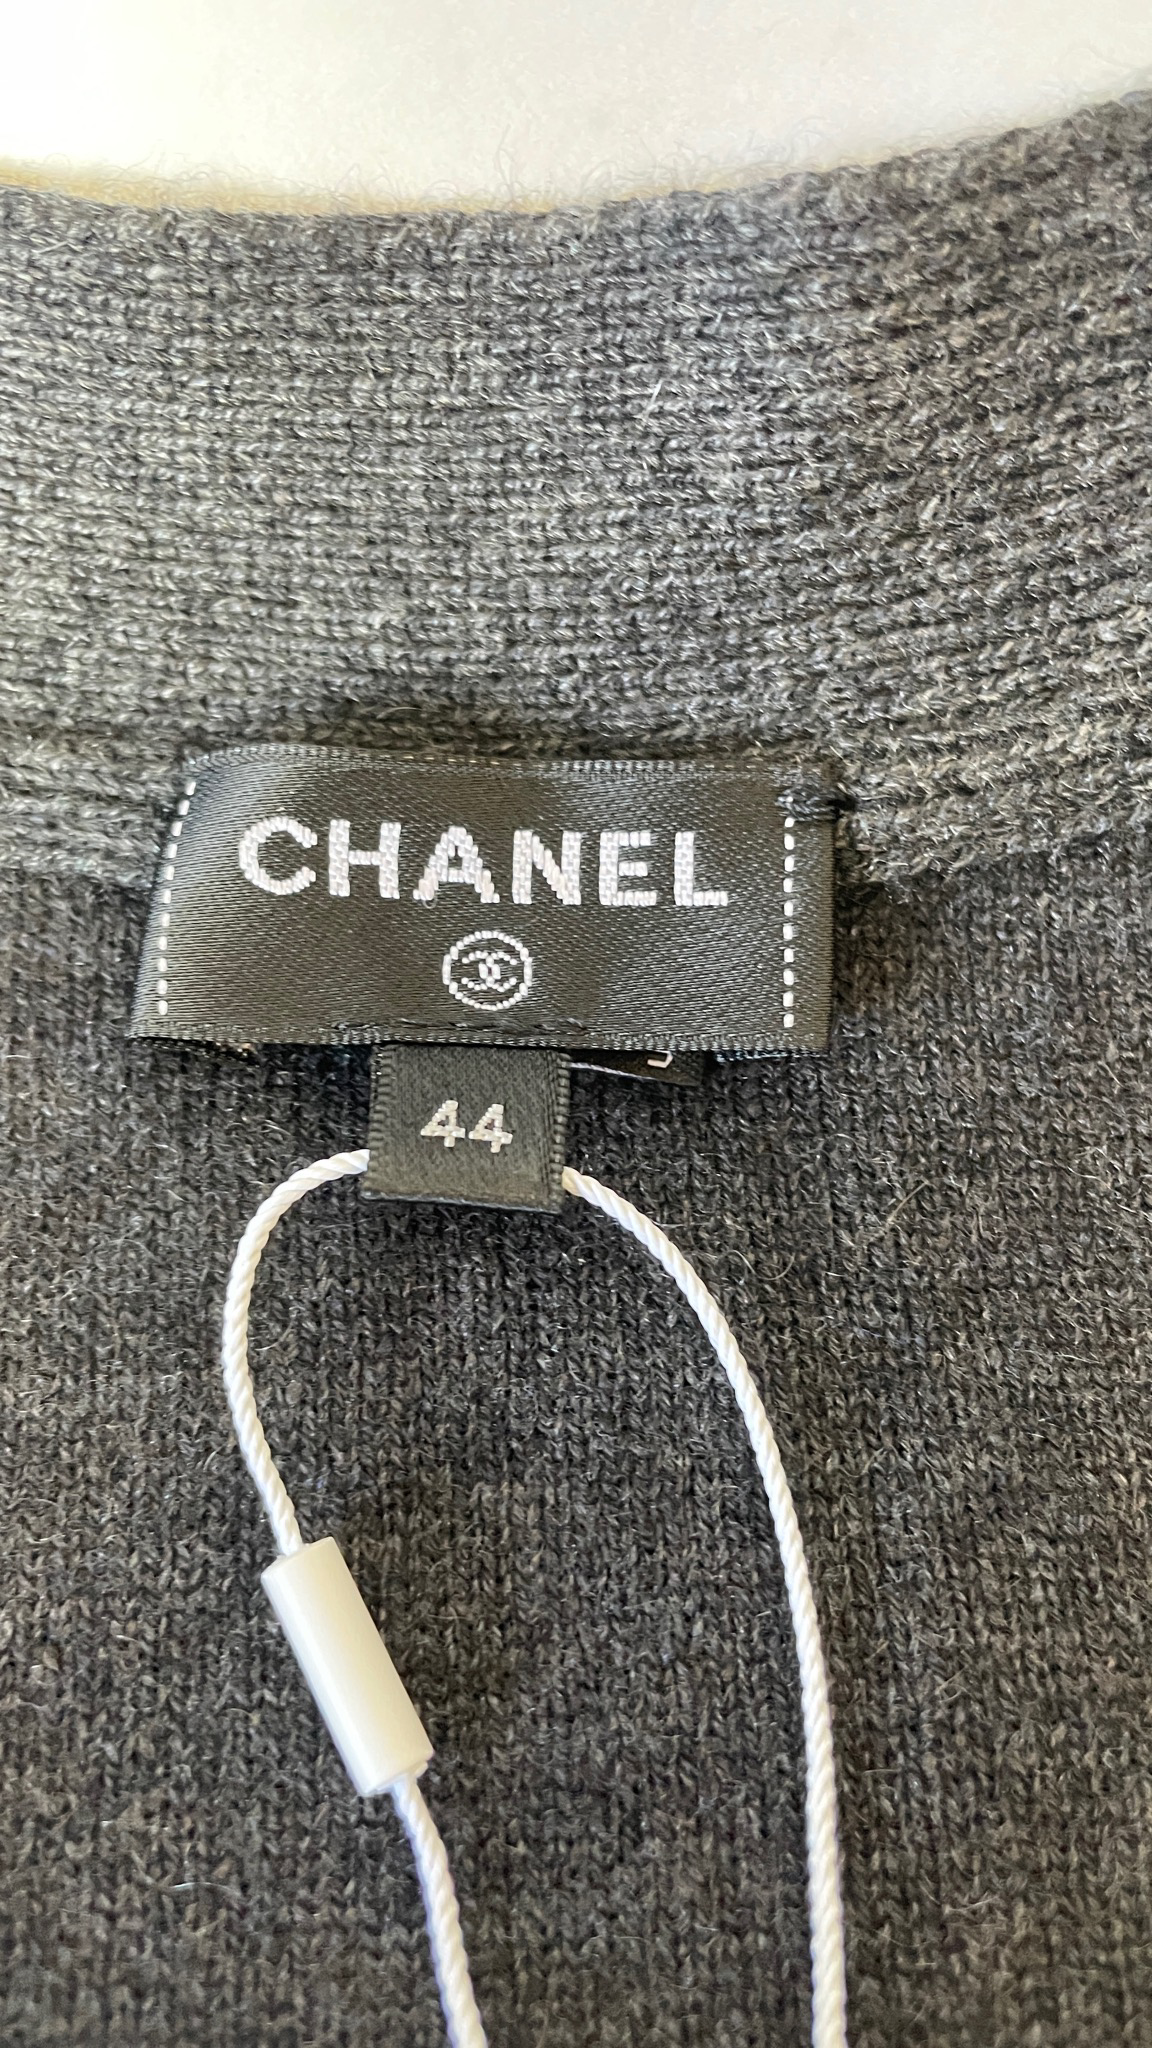 Chanel Cardigan Sweater, Grey with Silver CC, Size 44, New with Tag WA001